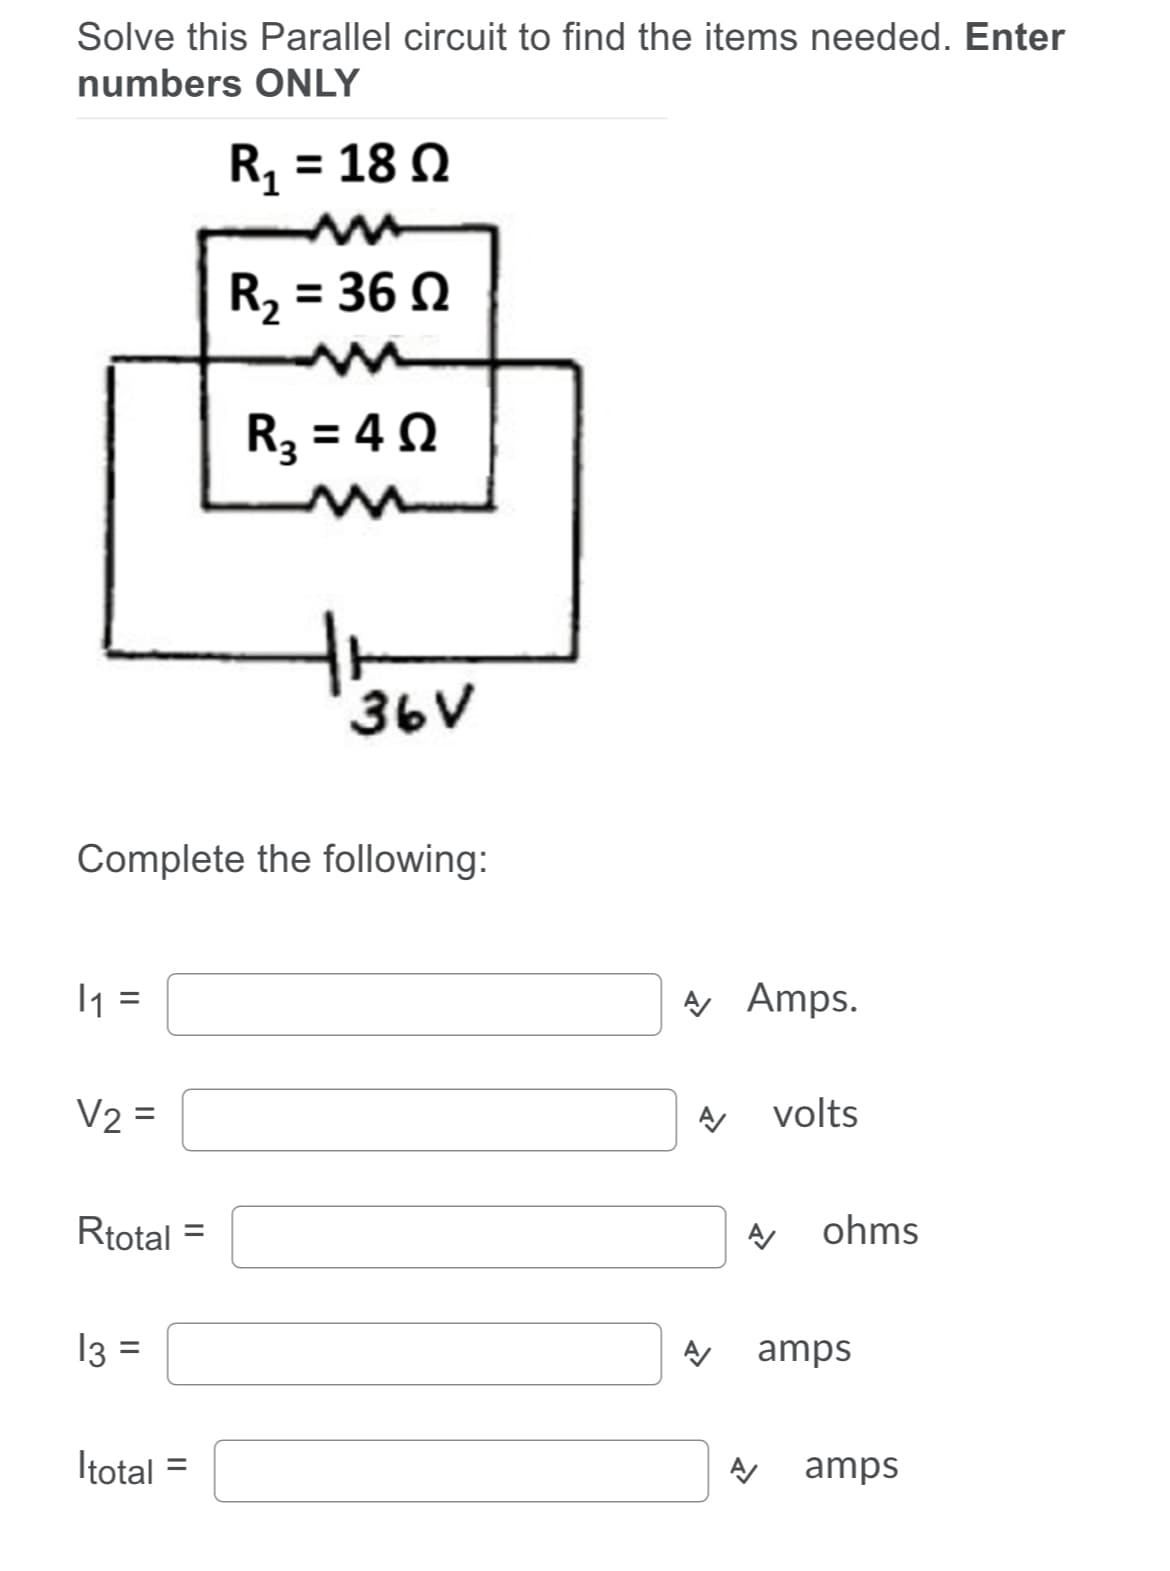 Soljvje this Parallel circuit to find the items needed. Enter
njbers ONLY
R, = 18 0
%3D
R, = 36 0
R3 = 40
36V
Complete the following:
I1 =
A Amps.
V2 =
volts
Rtotal
ohms
13 =
⒤뀐⒤
amps
Itotal =
amps
